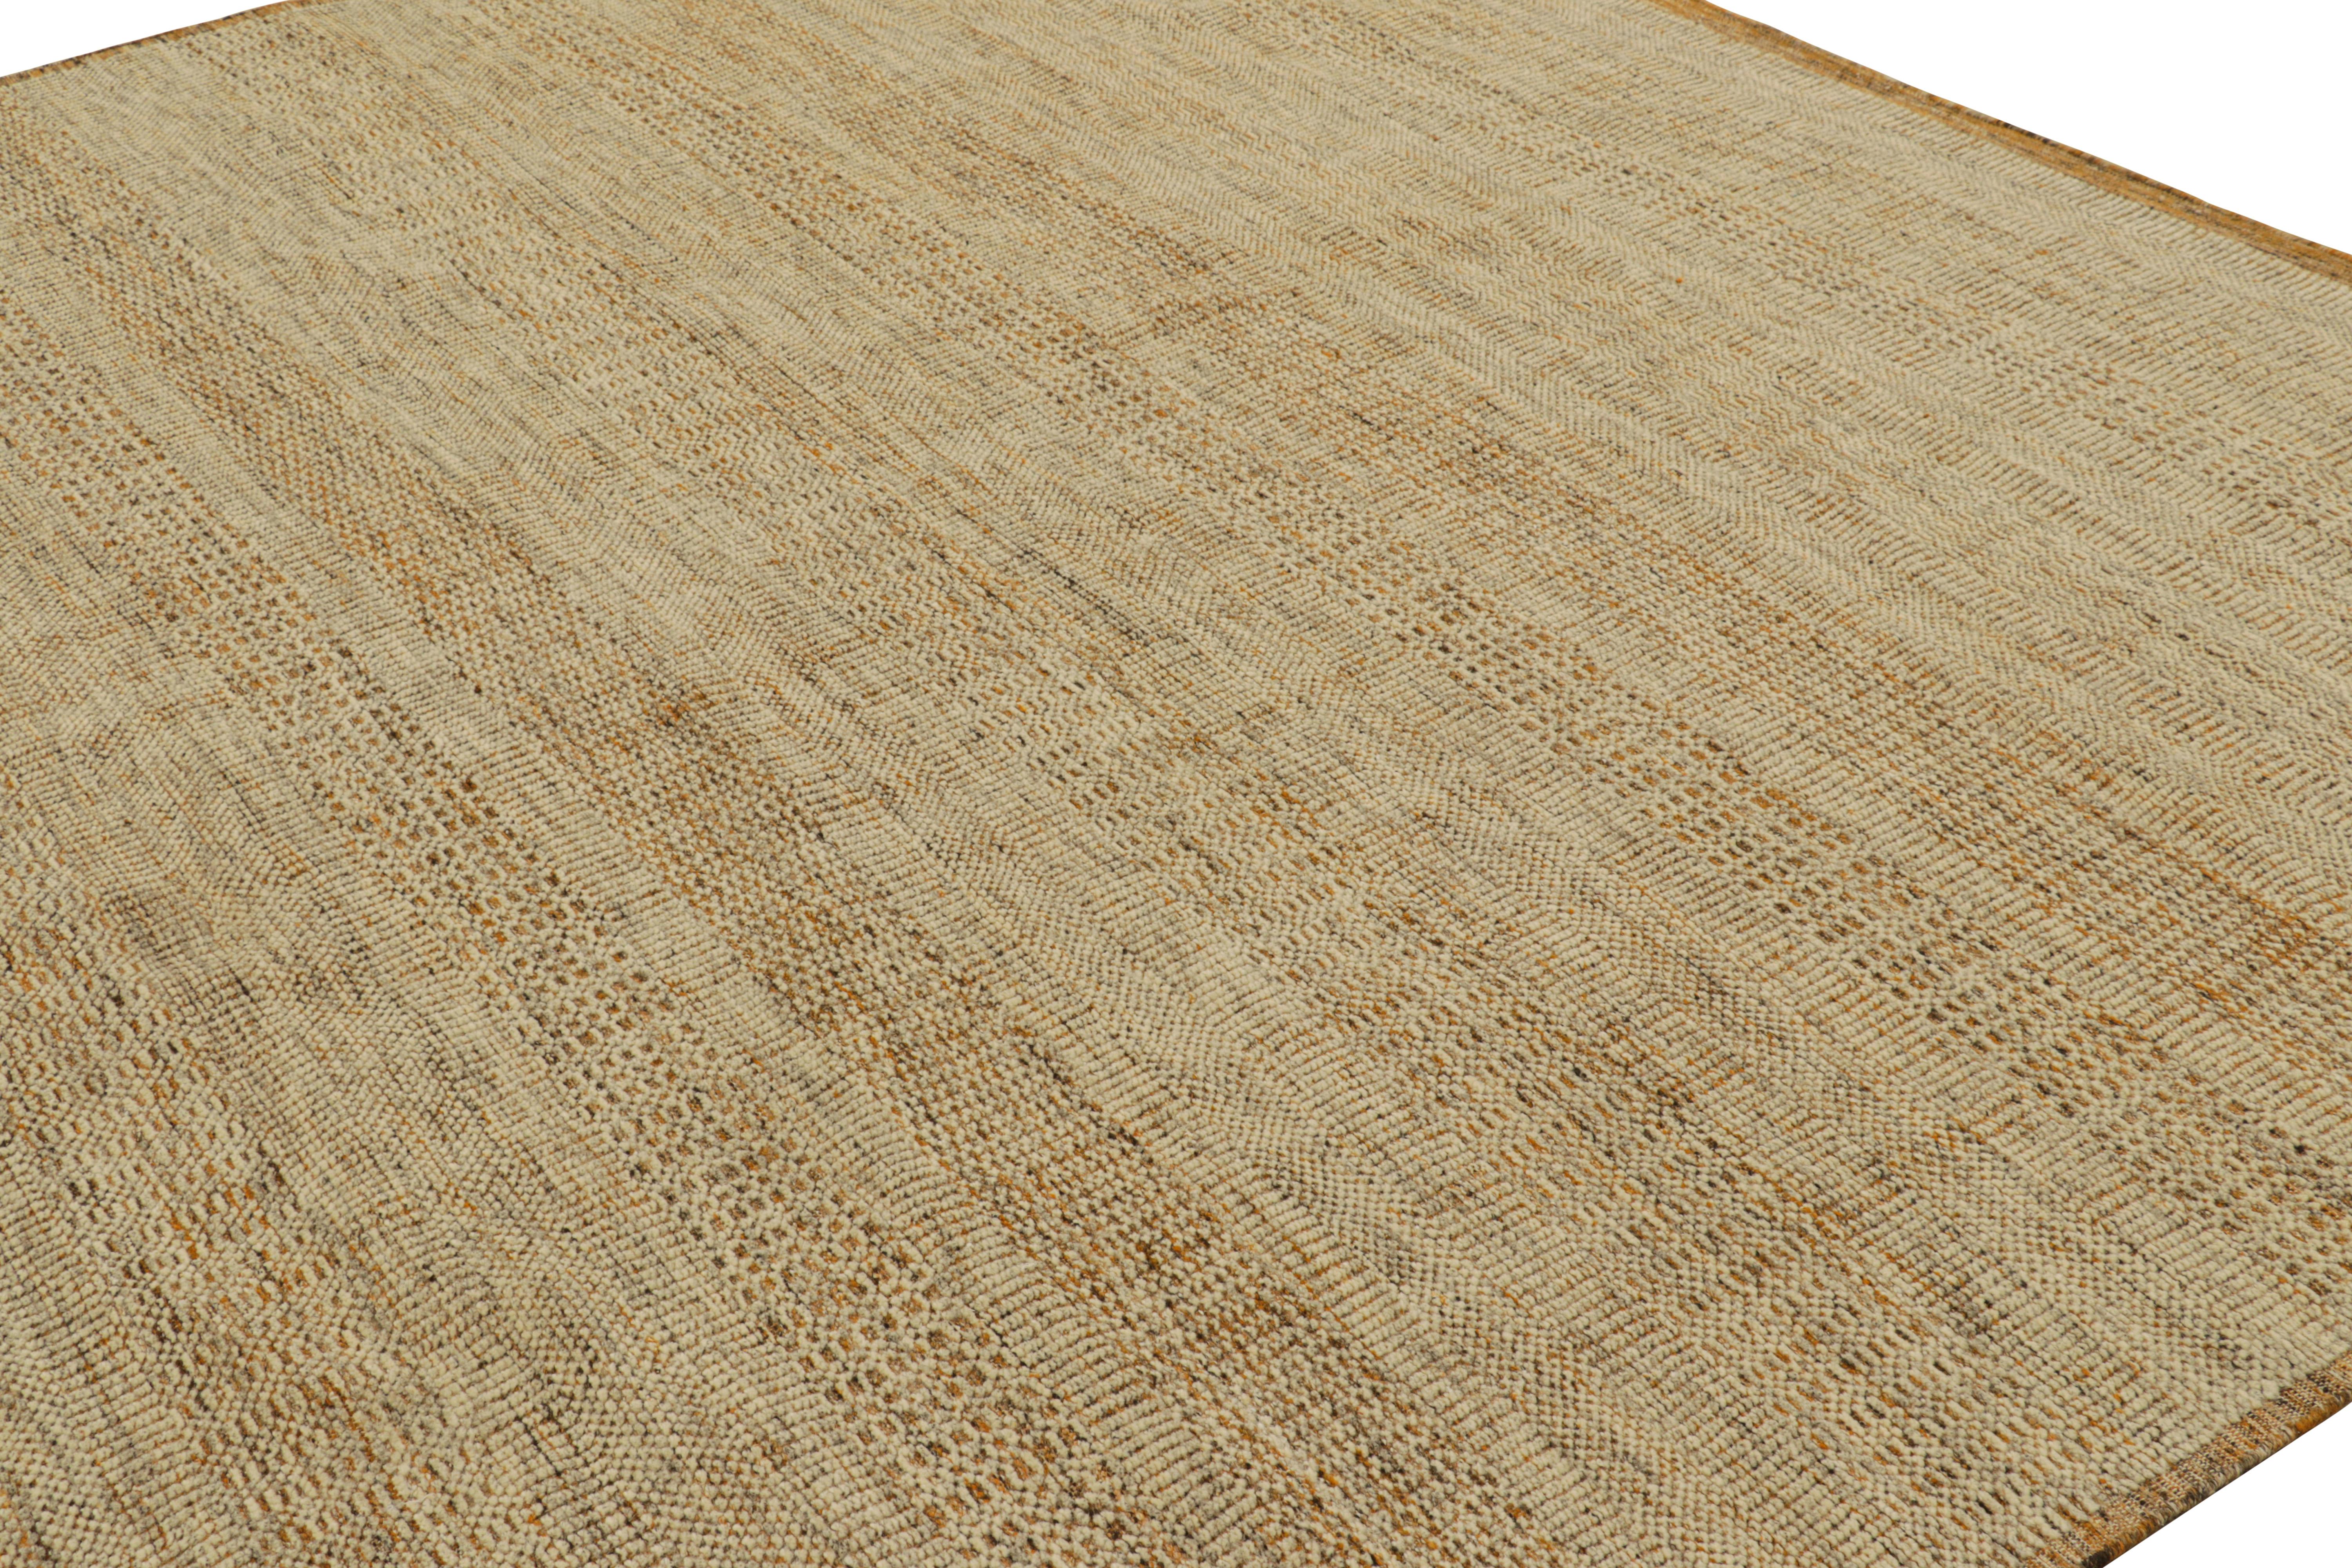 Indian Rug & Kilim’s Contemporary Textural Rug in Tones of Beige/Brown For Sale